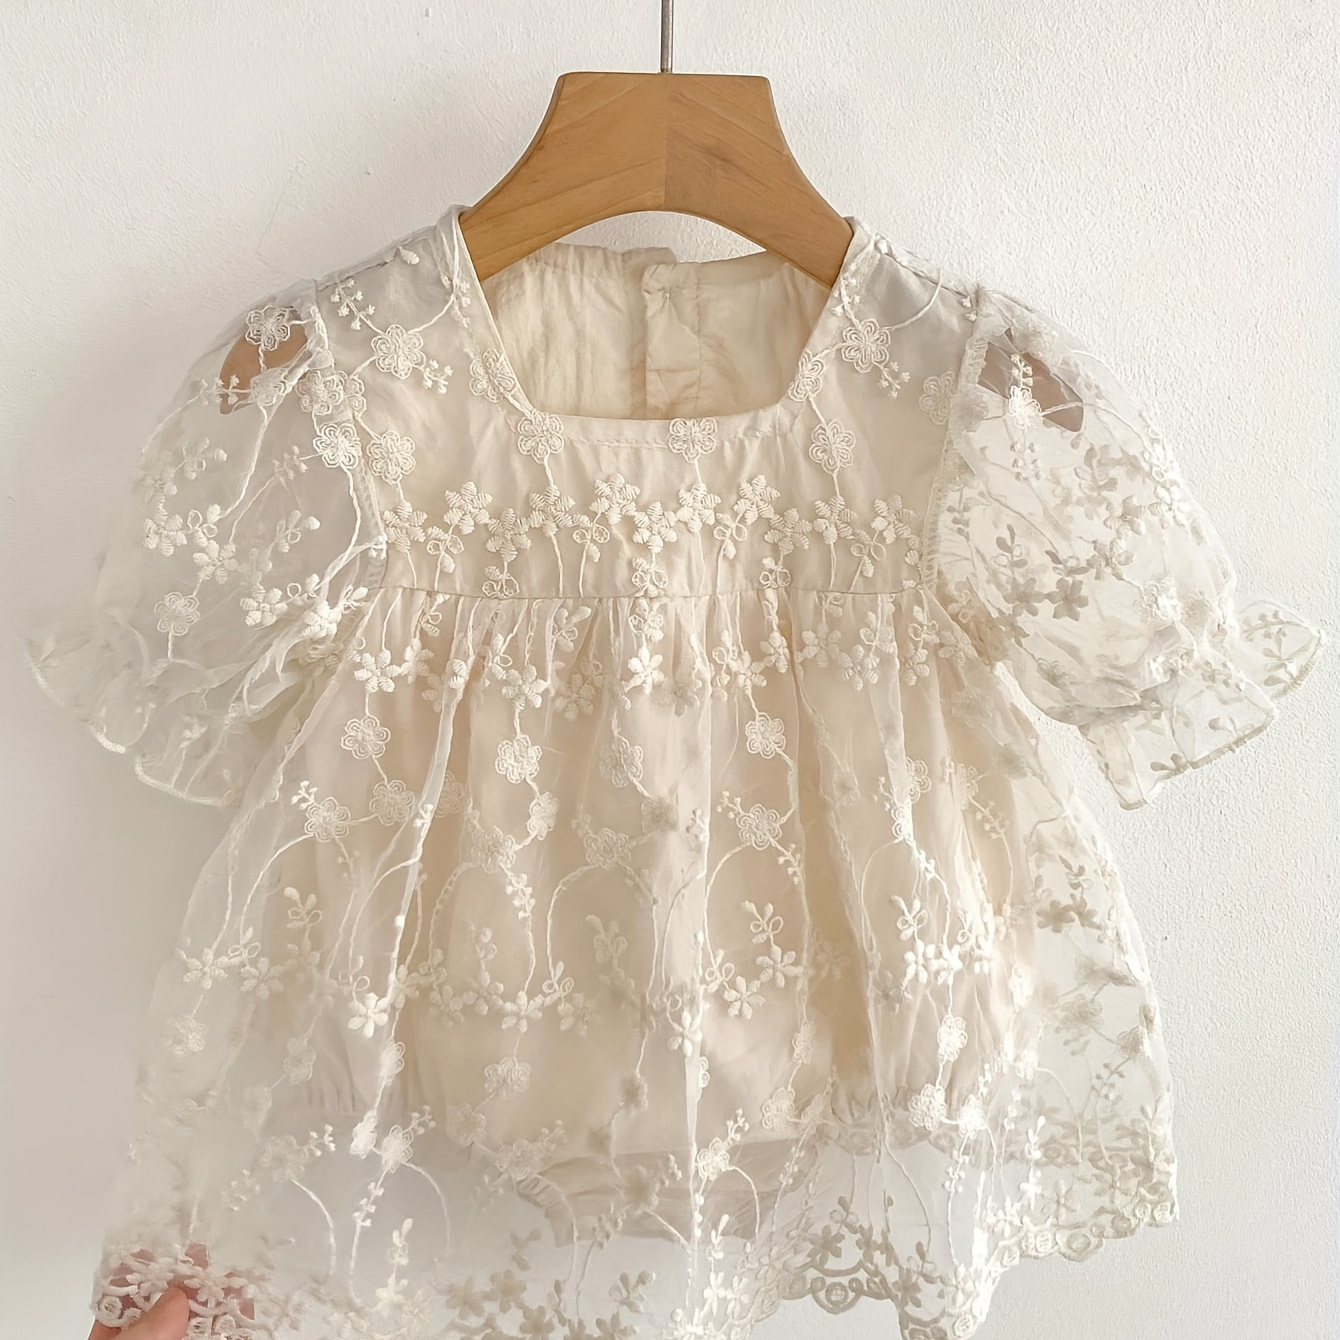 

Baby's Flower Embroidered Tulle Splicing Romper Dress, Casual Elegant Puff Sleeve Dress, Infant & Toddler Girl's Clothing For Summer/spring, As Gift